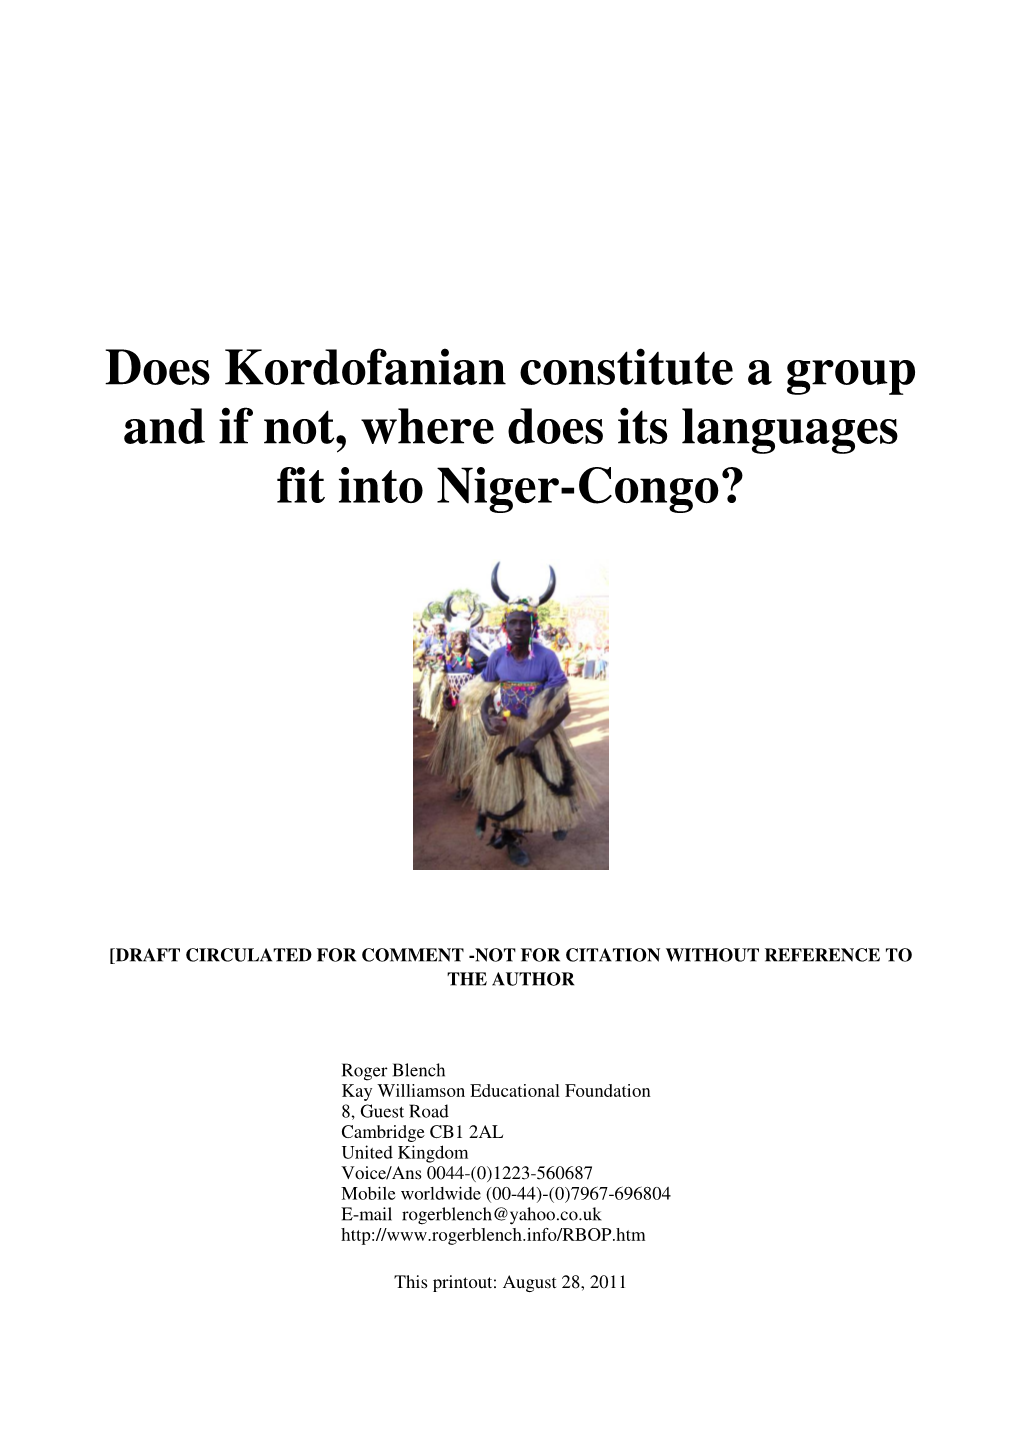 Does Kordofanian Constitute a Group and If Not, Where Does Its Languages Fit Into Niger-Congo?